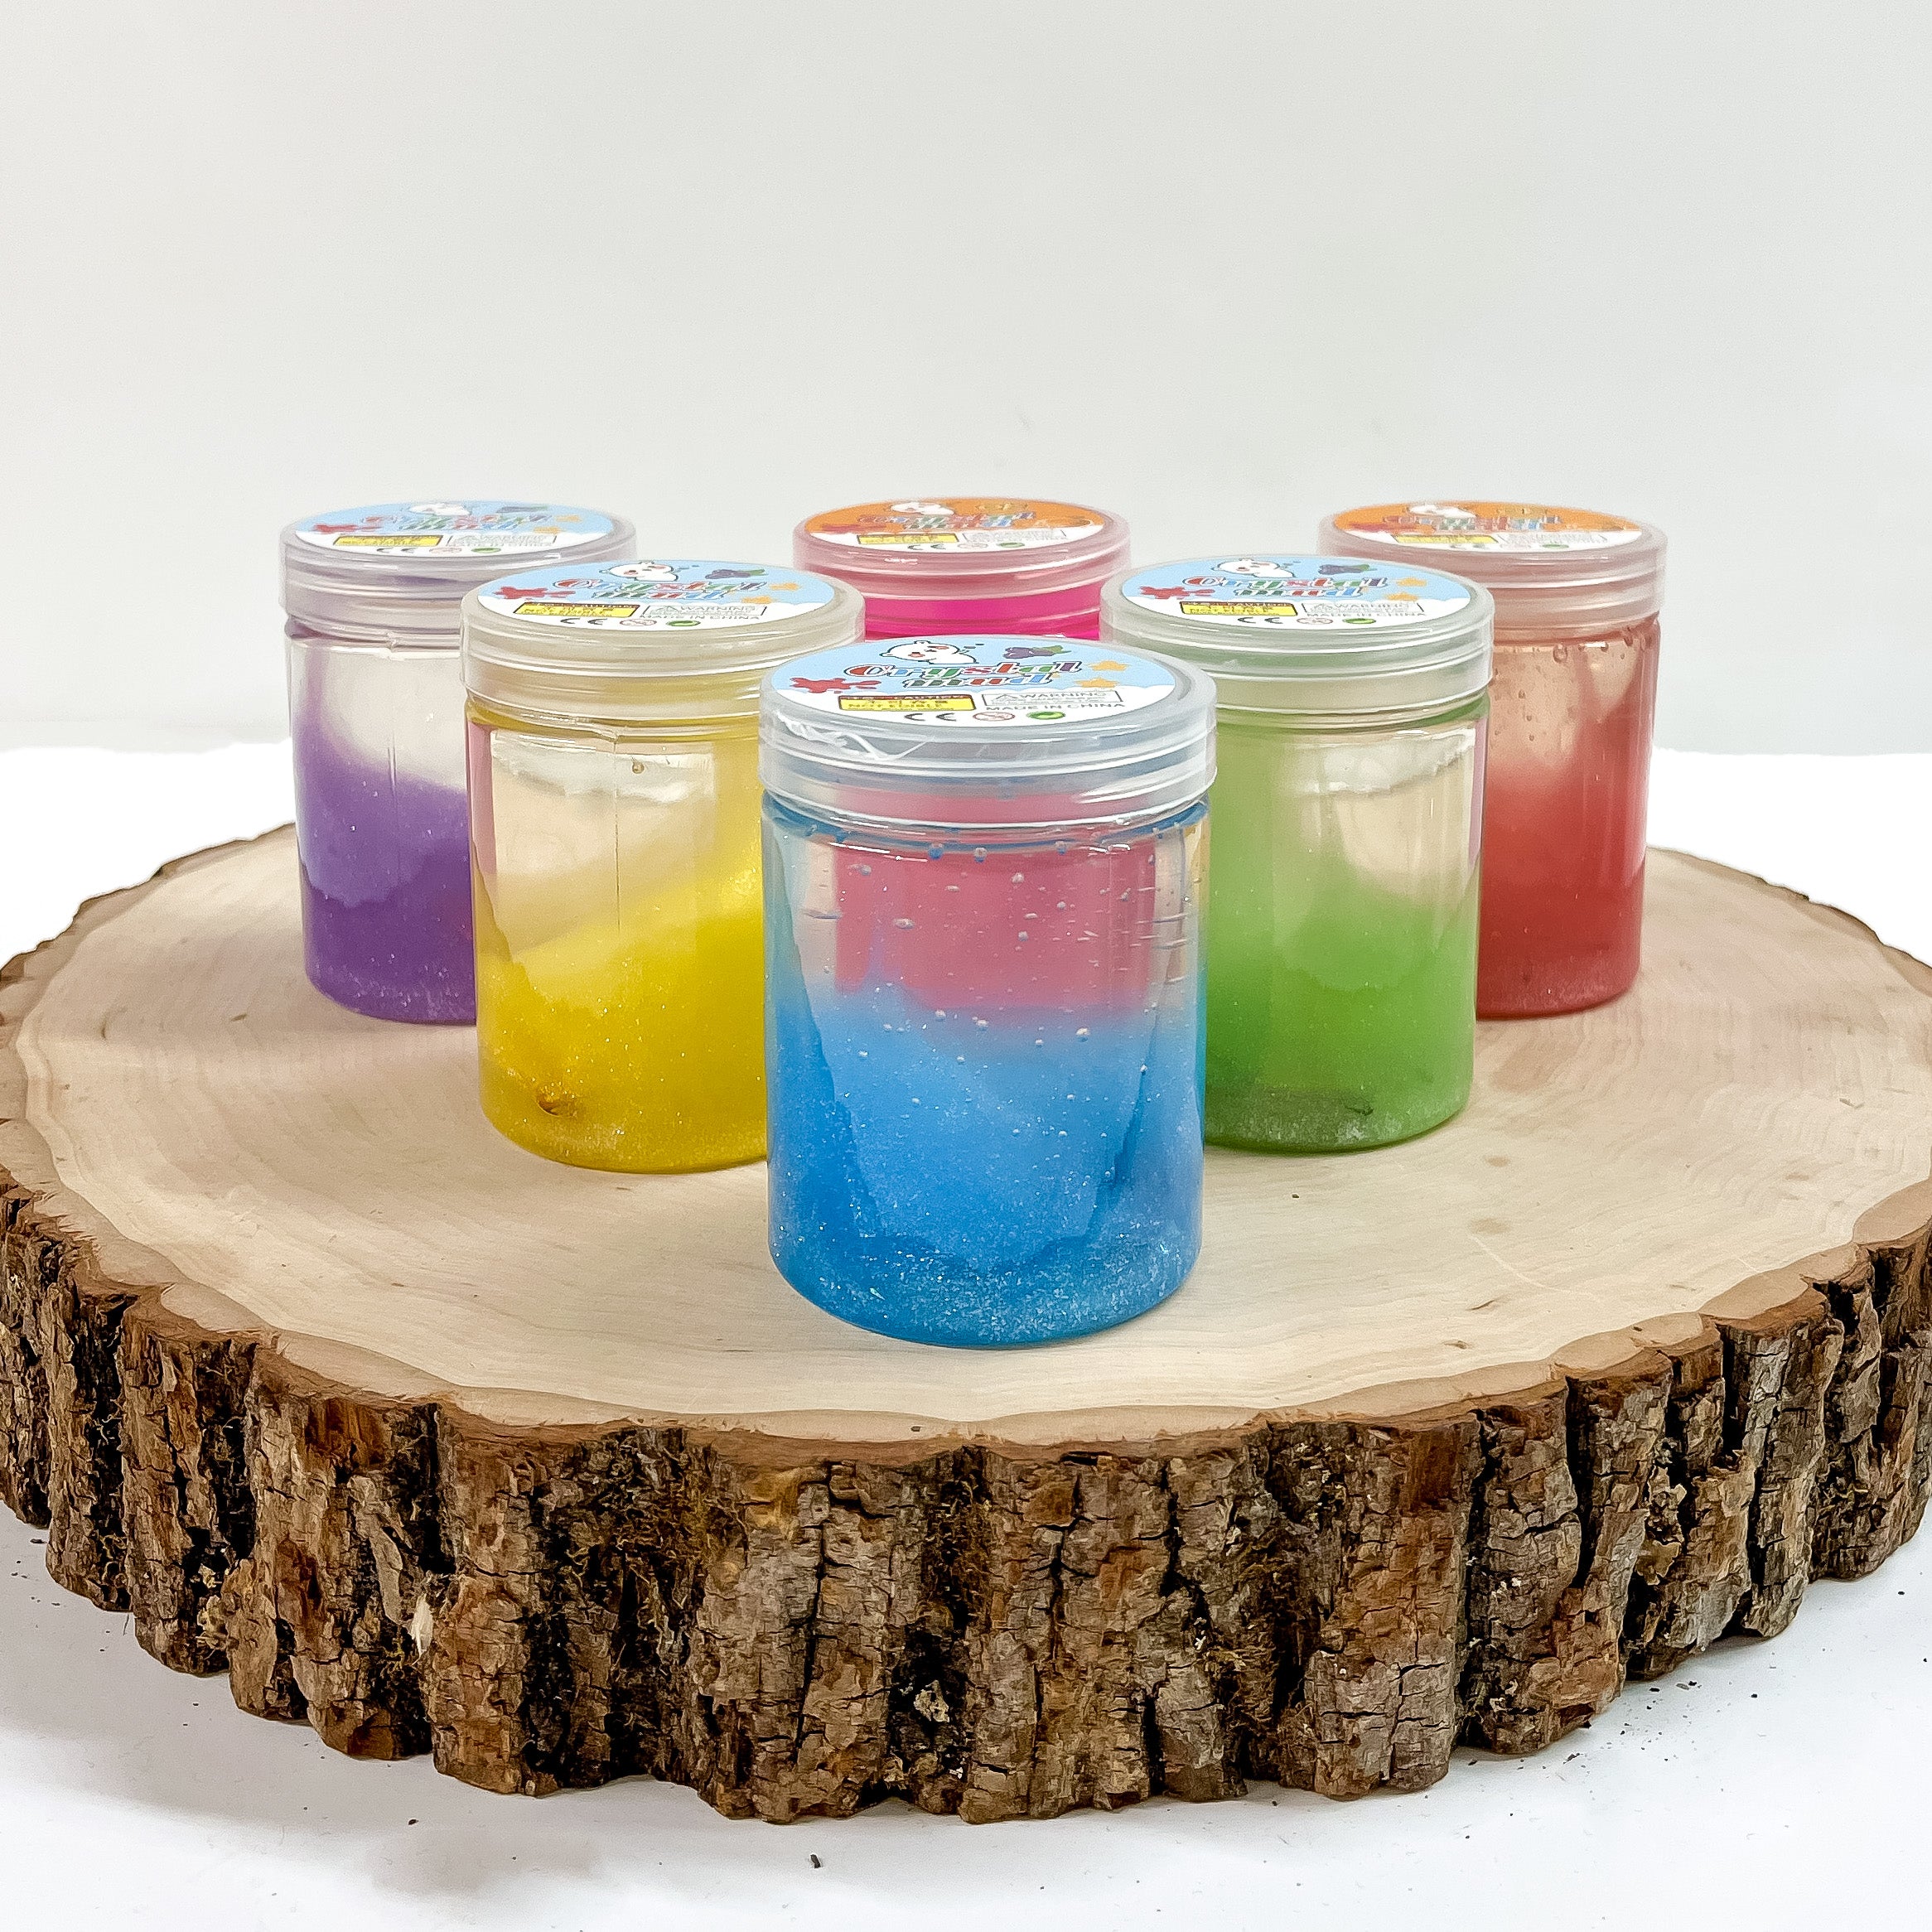 There are six small clear containers with different colors in a traingle shaped. These clear slimes are taken on a slab of wood and on a white background.